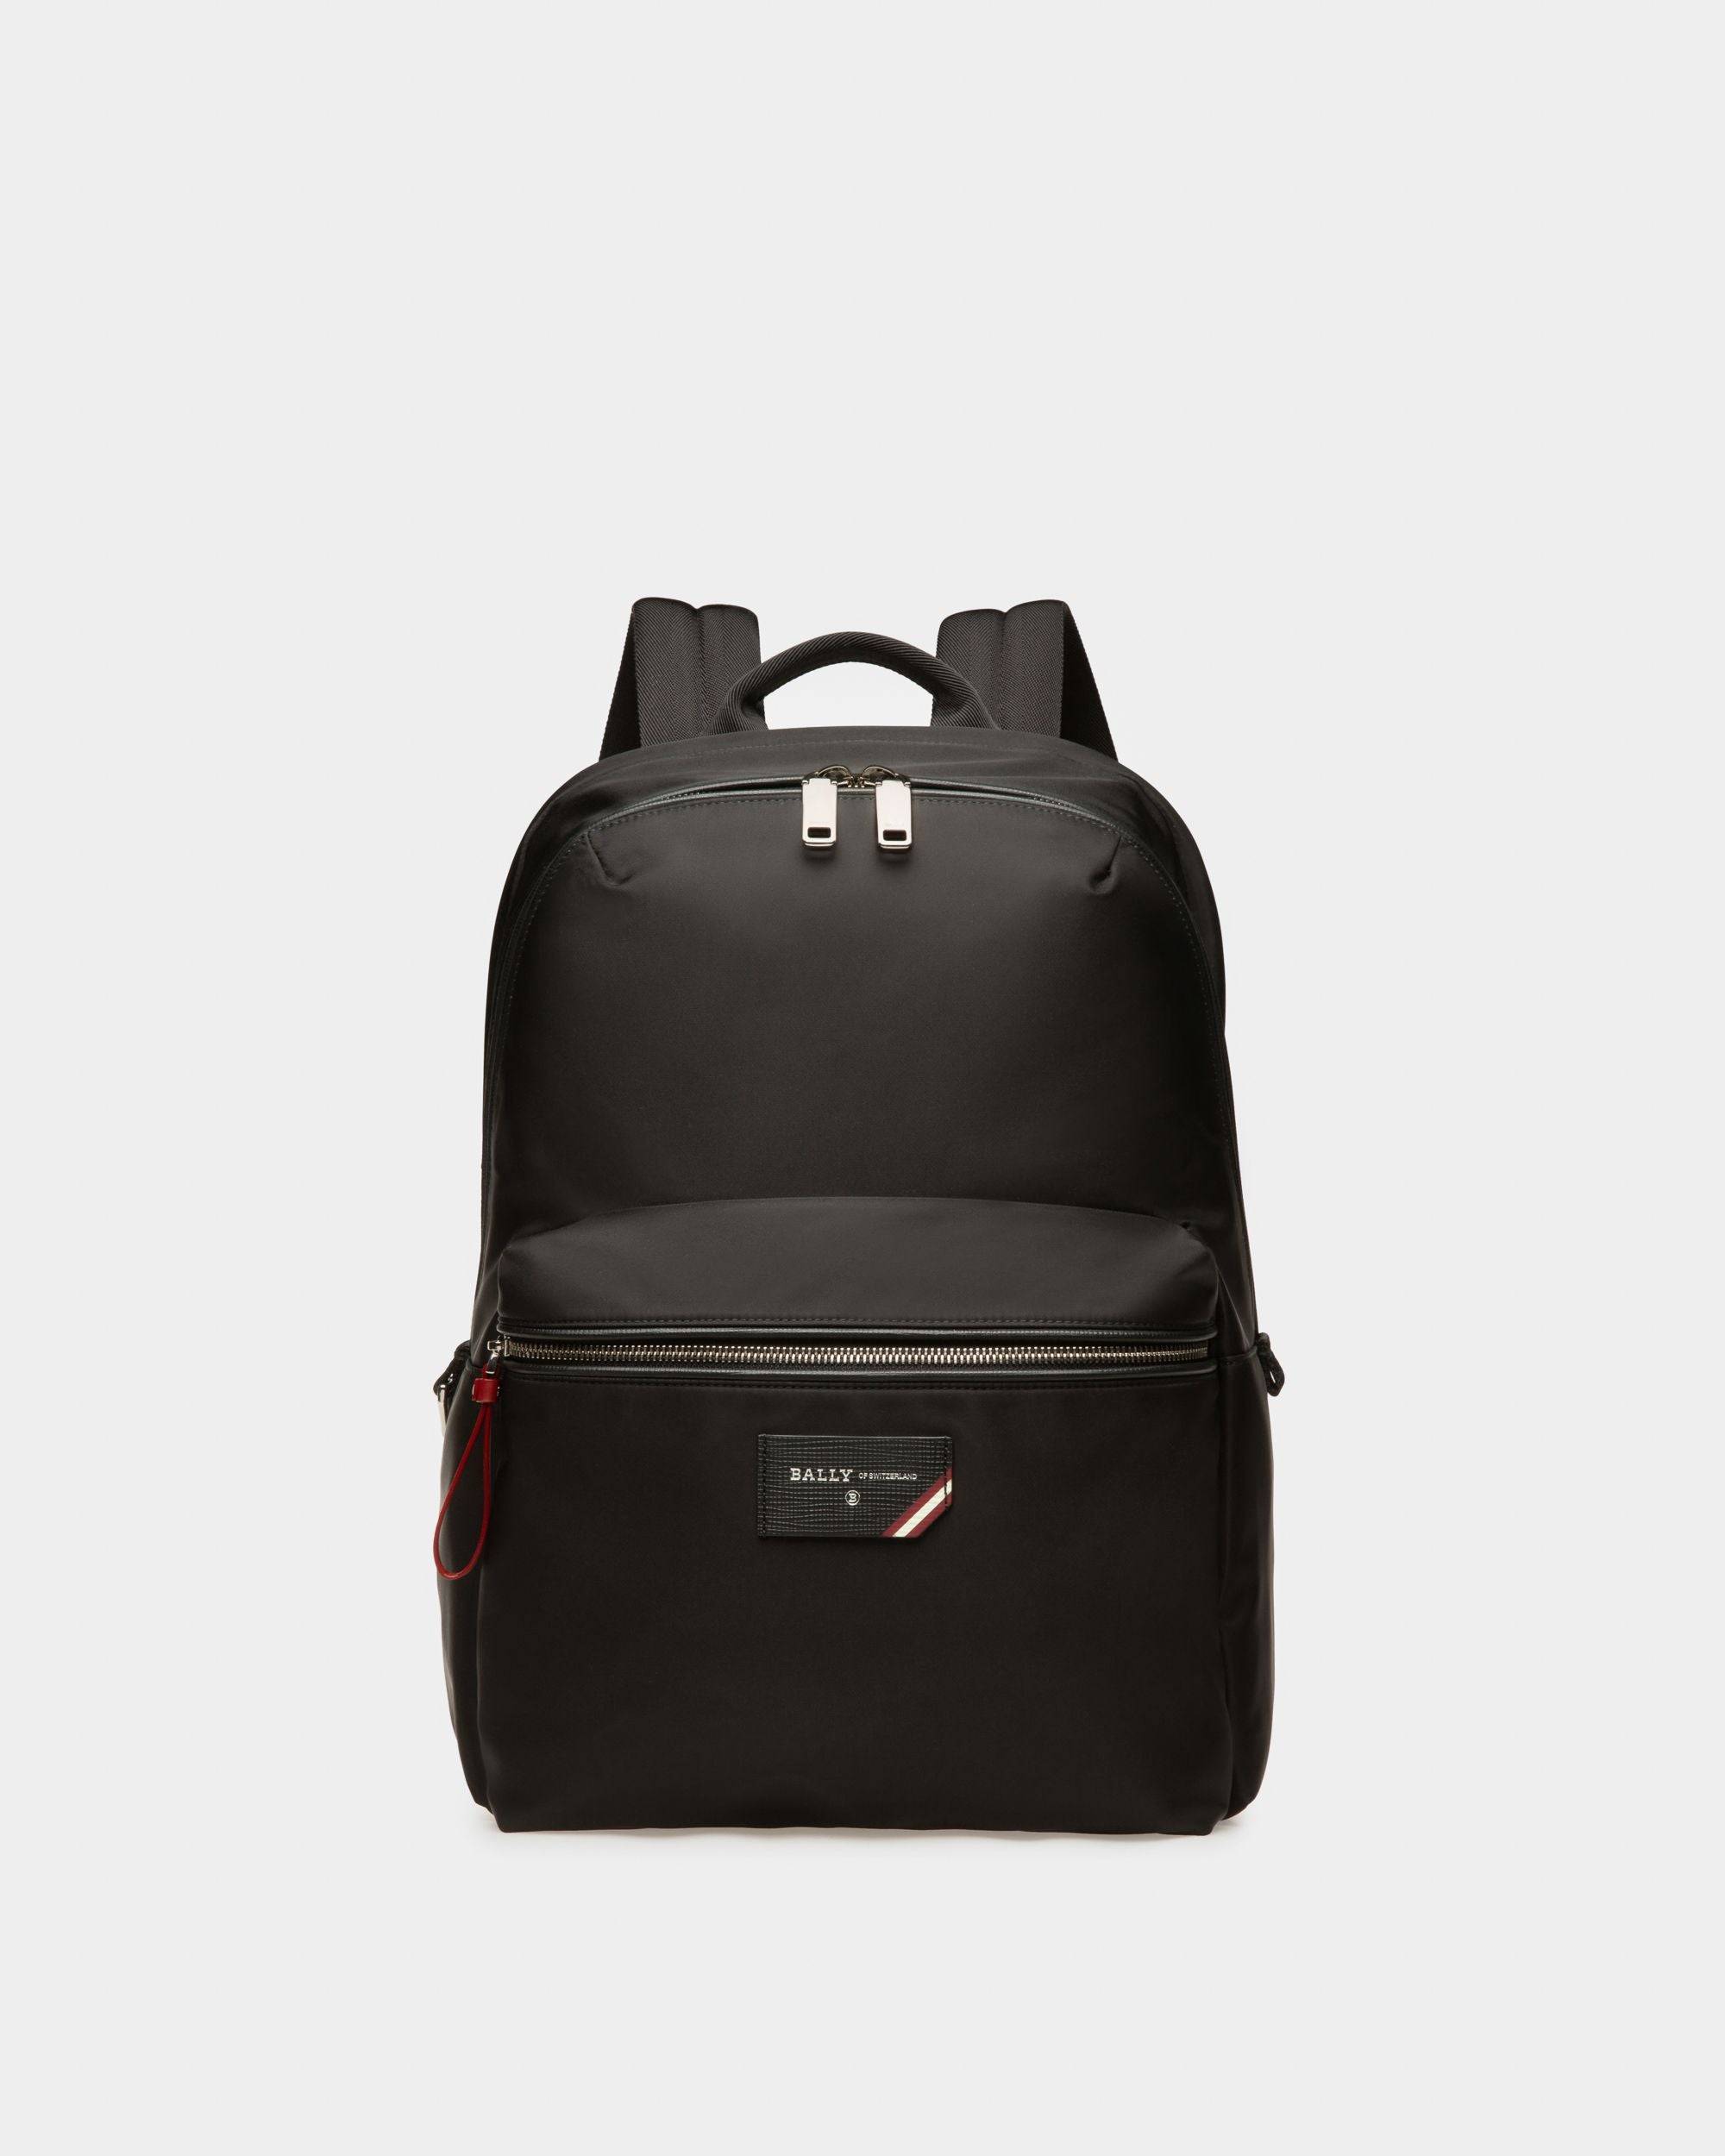 Men's Explore Backpack In Black Leather And Nylon | Bally | Still Life Front